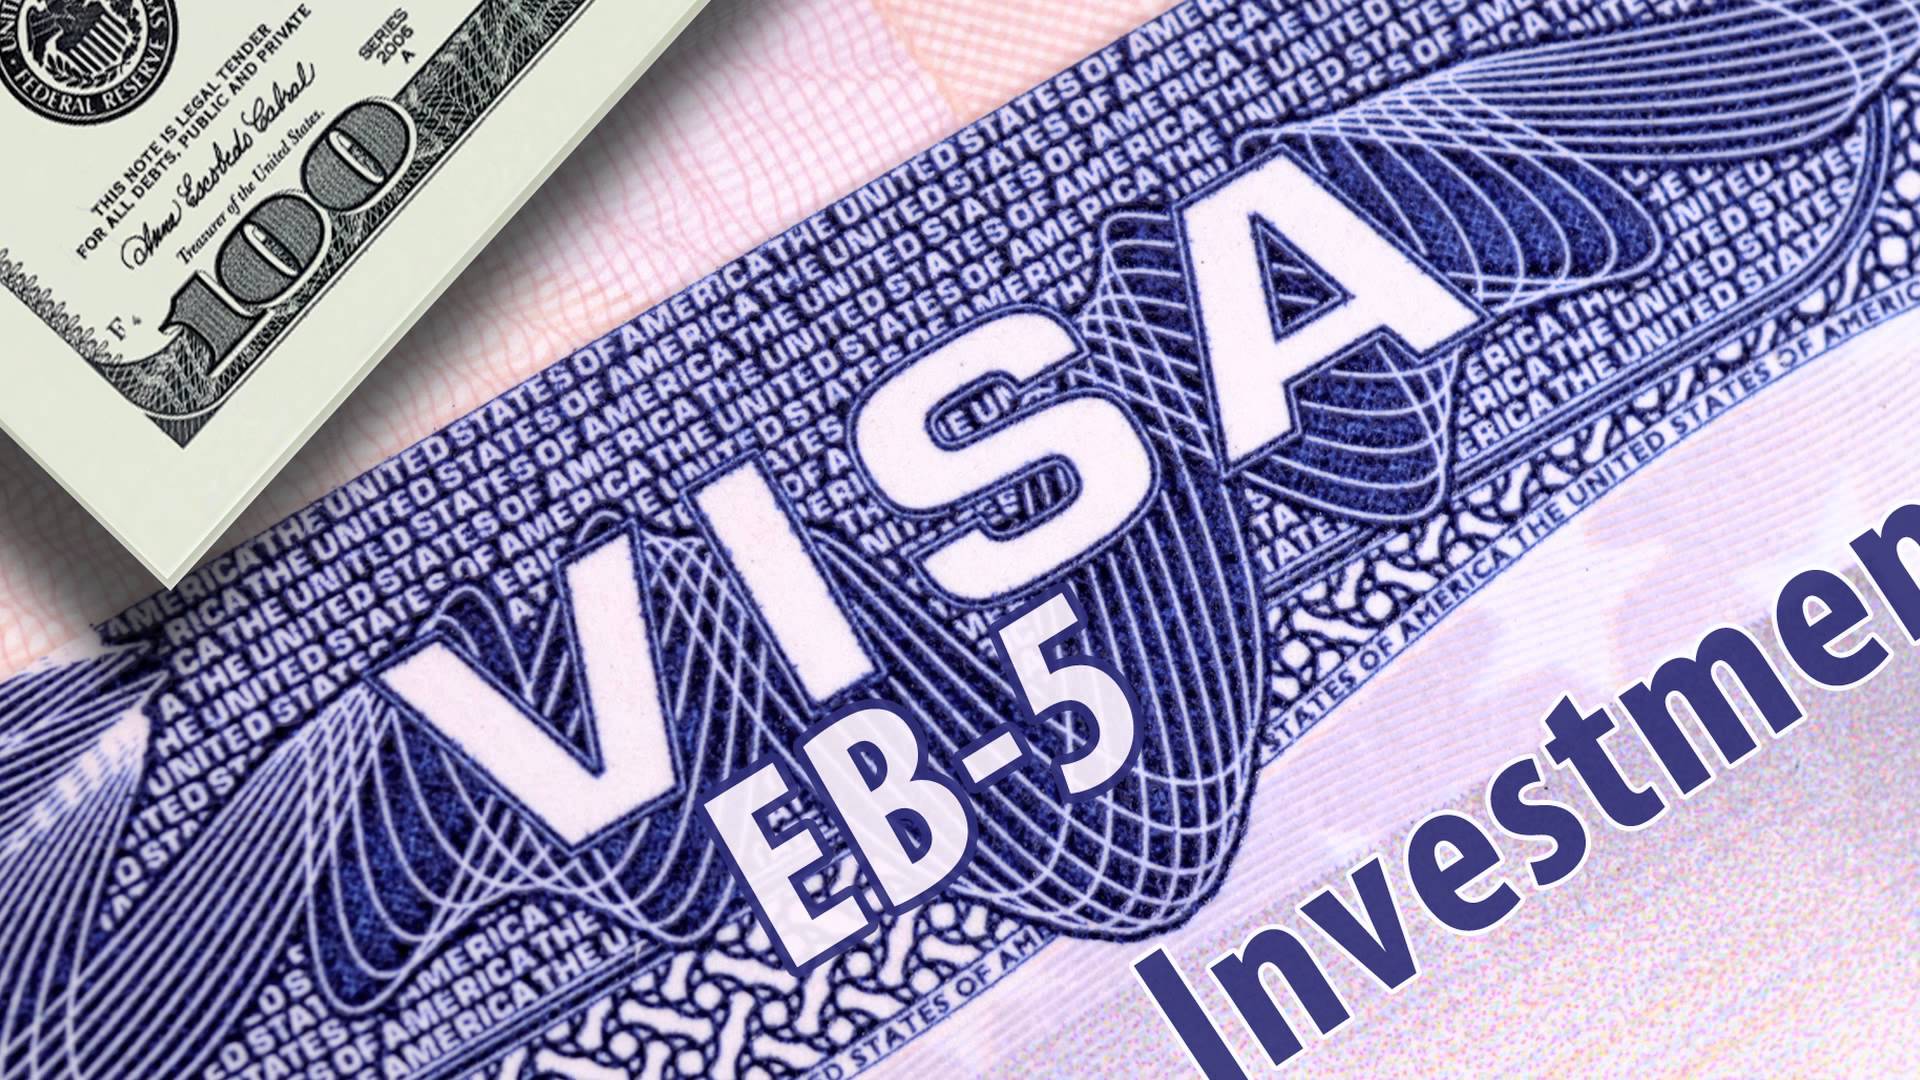 what-is-eb-5-eb5-visa-program-500-000-green-card-investment